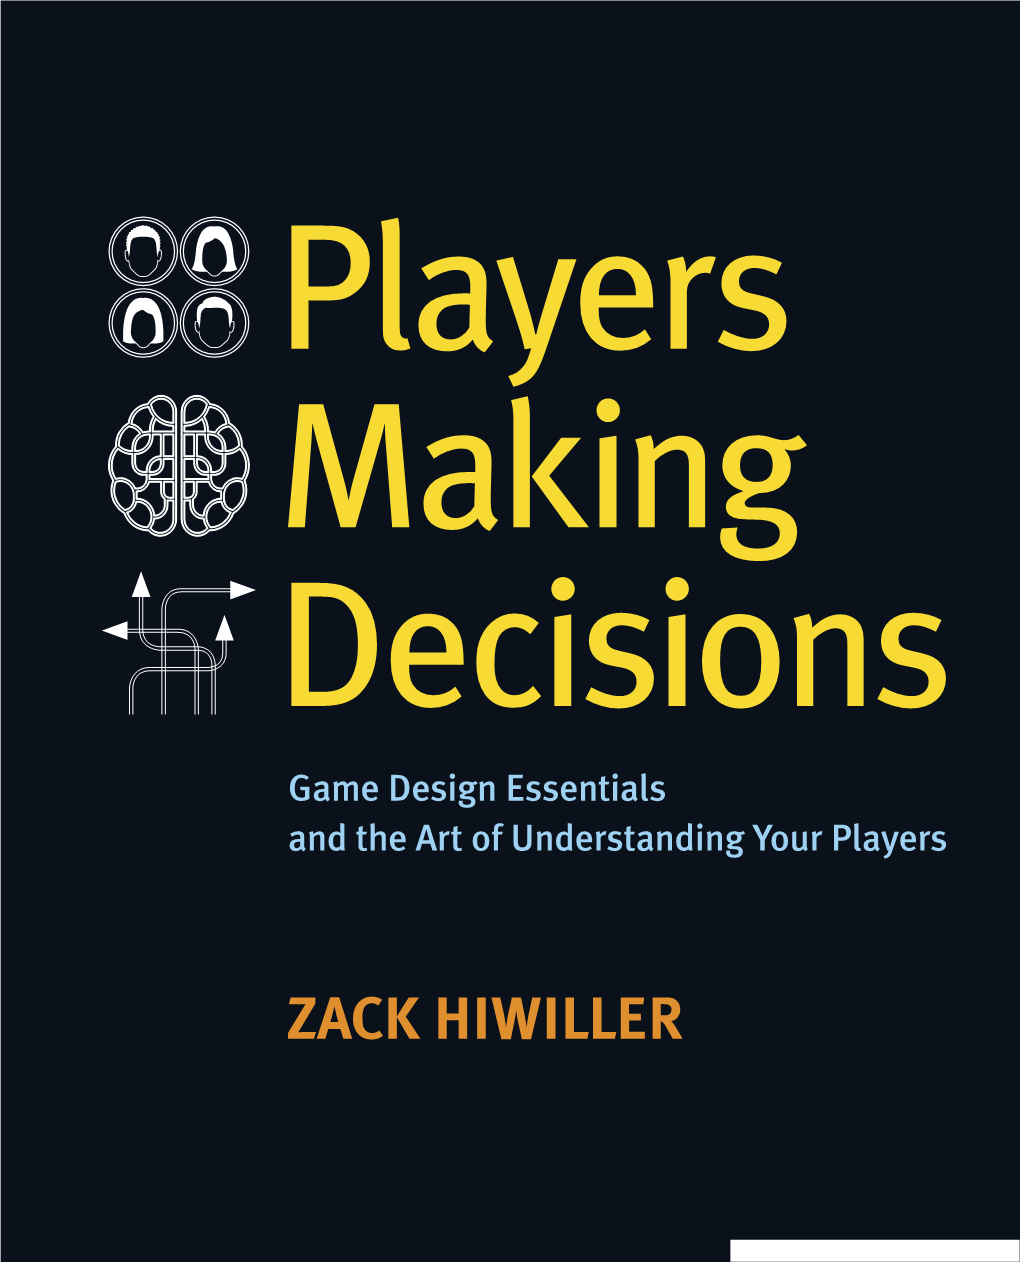 Game Design Essentials and the Art of Understanding Your Players